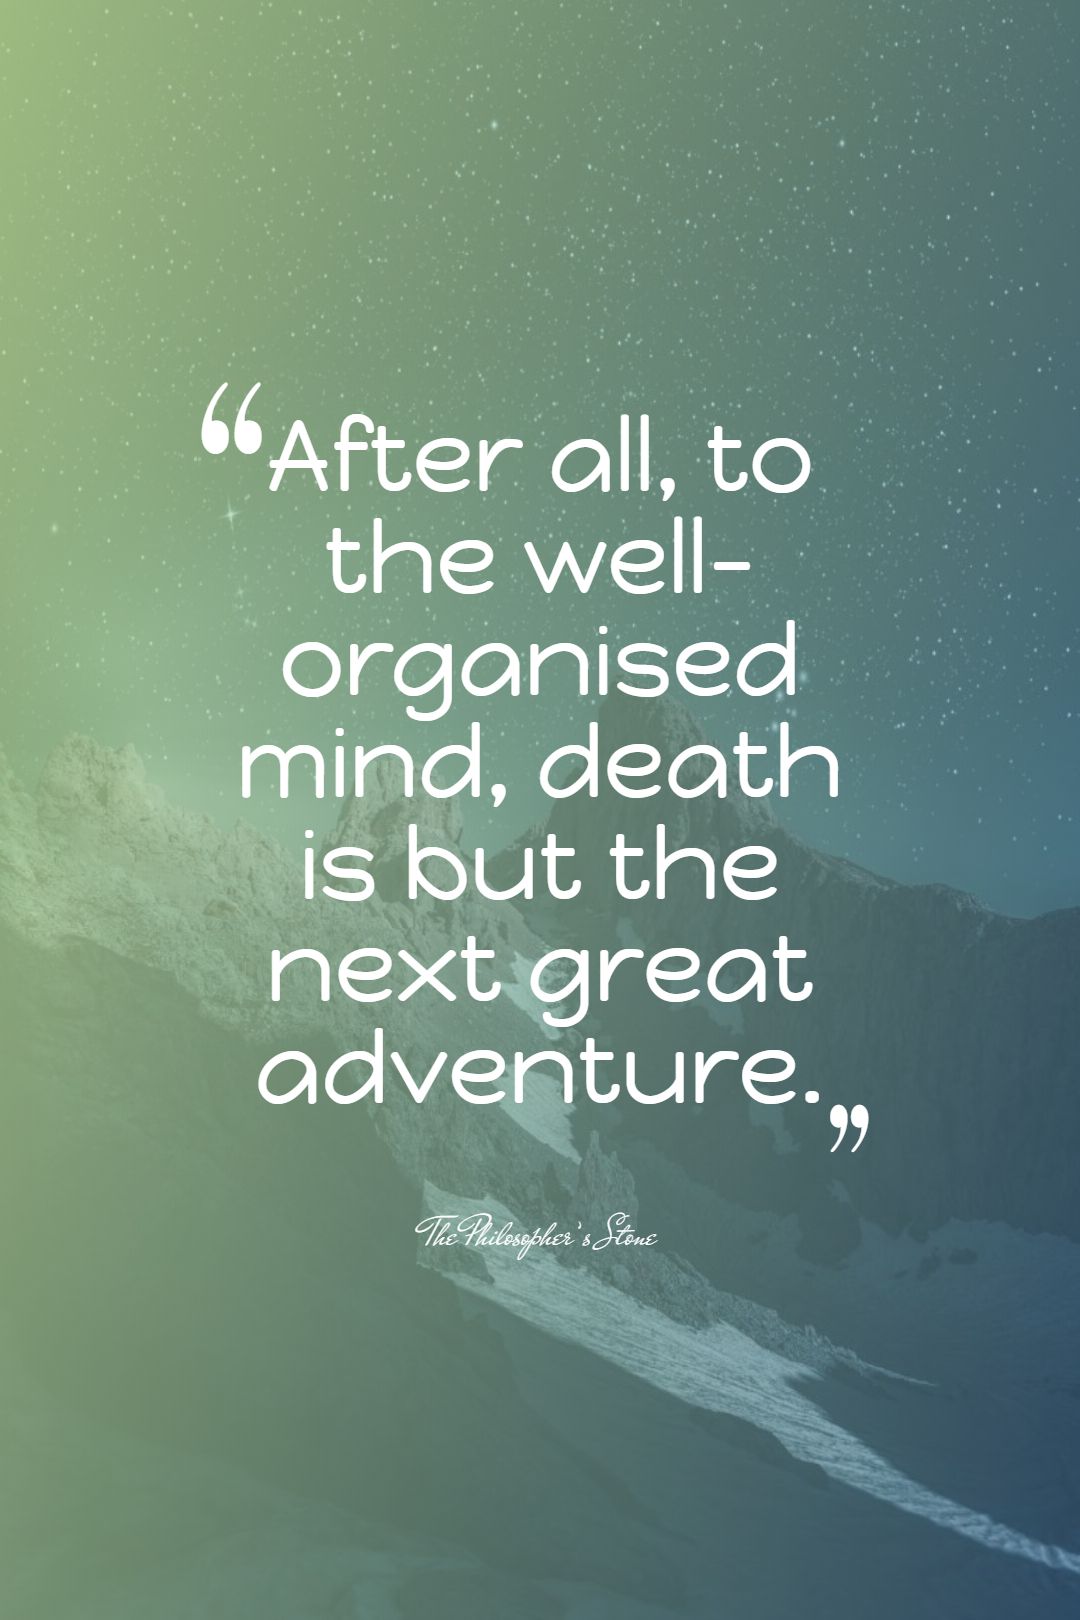 After all to the well organised mind death is but the next great adventure.